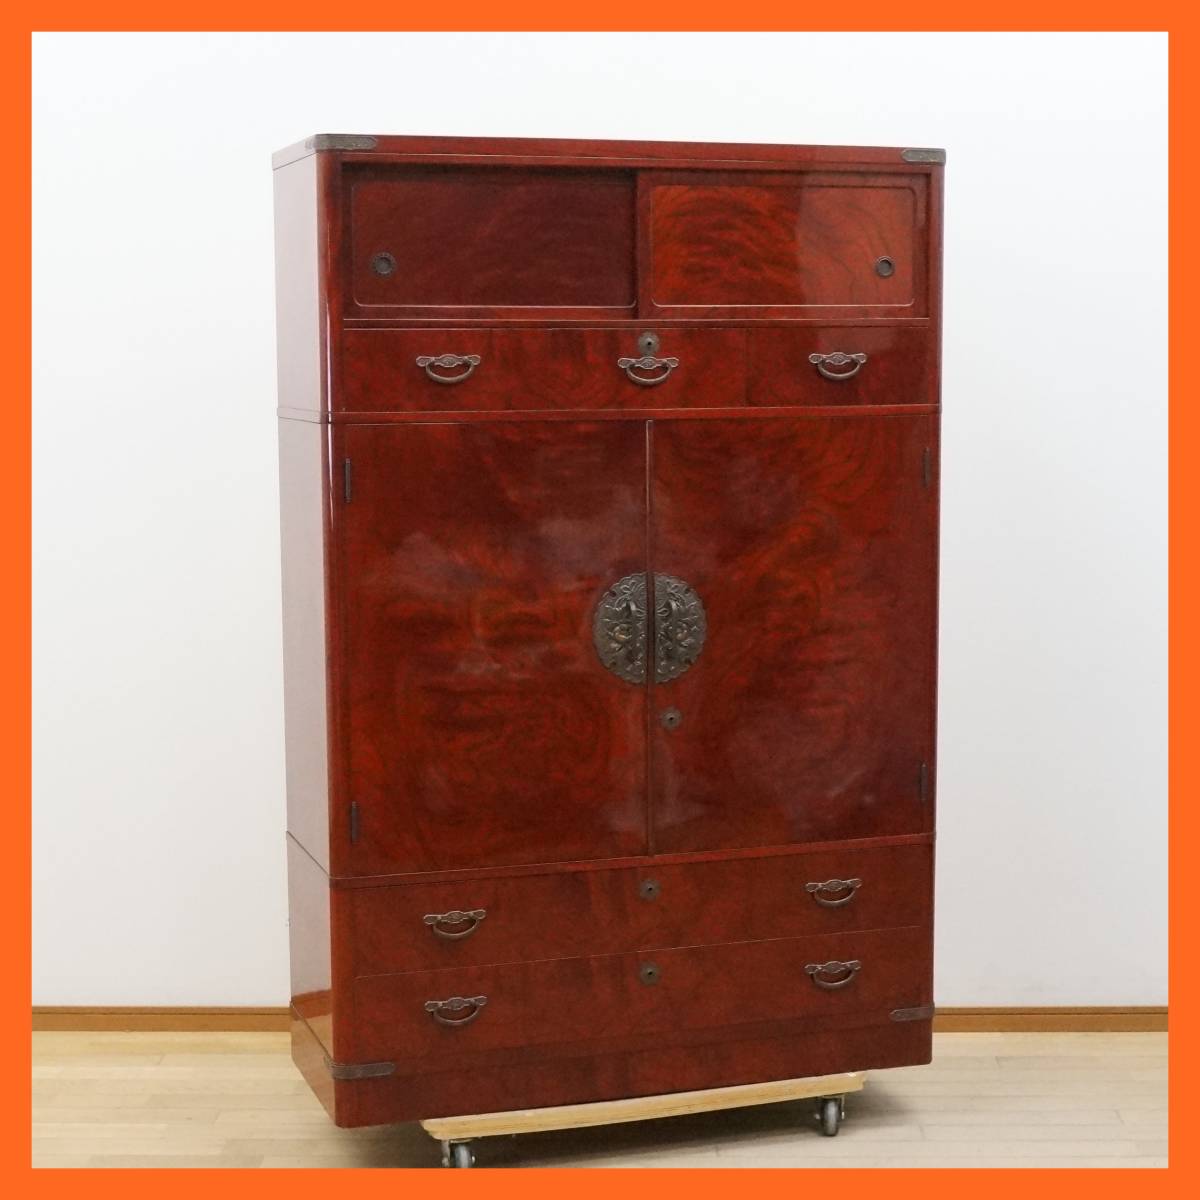  higashi is :[ peace chest of drawers ] costume chest of drawers width approximately 121.5. height approximately 179. natural tree costume chest Japanese-style chest adjustment chest of drawers peace furniture 